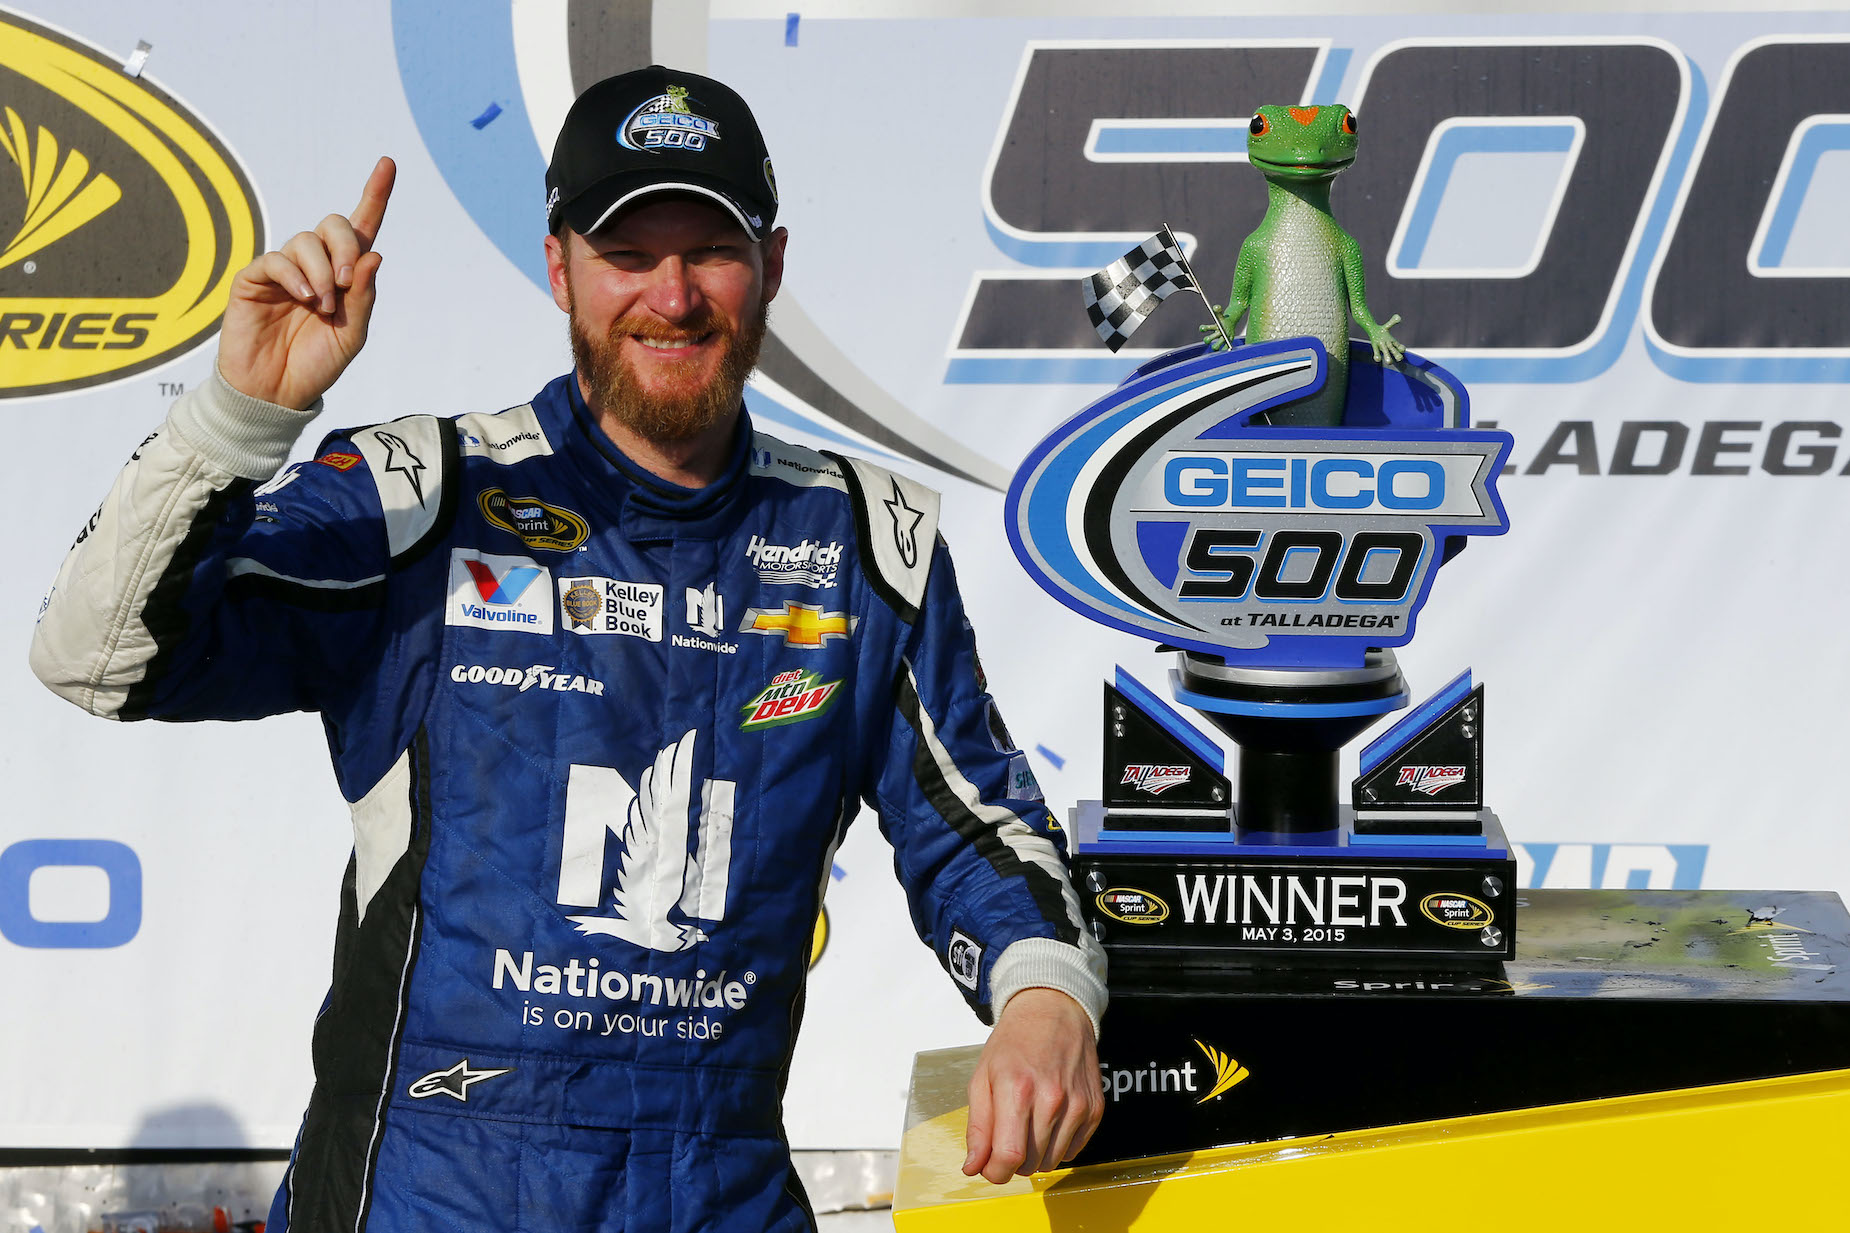 Dale Earnhardt Jr. built up a massive net worth as a NASCAR star, but refused to look at his salary after signing a contract with Hendrick Motorsports.